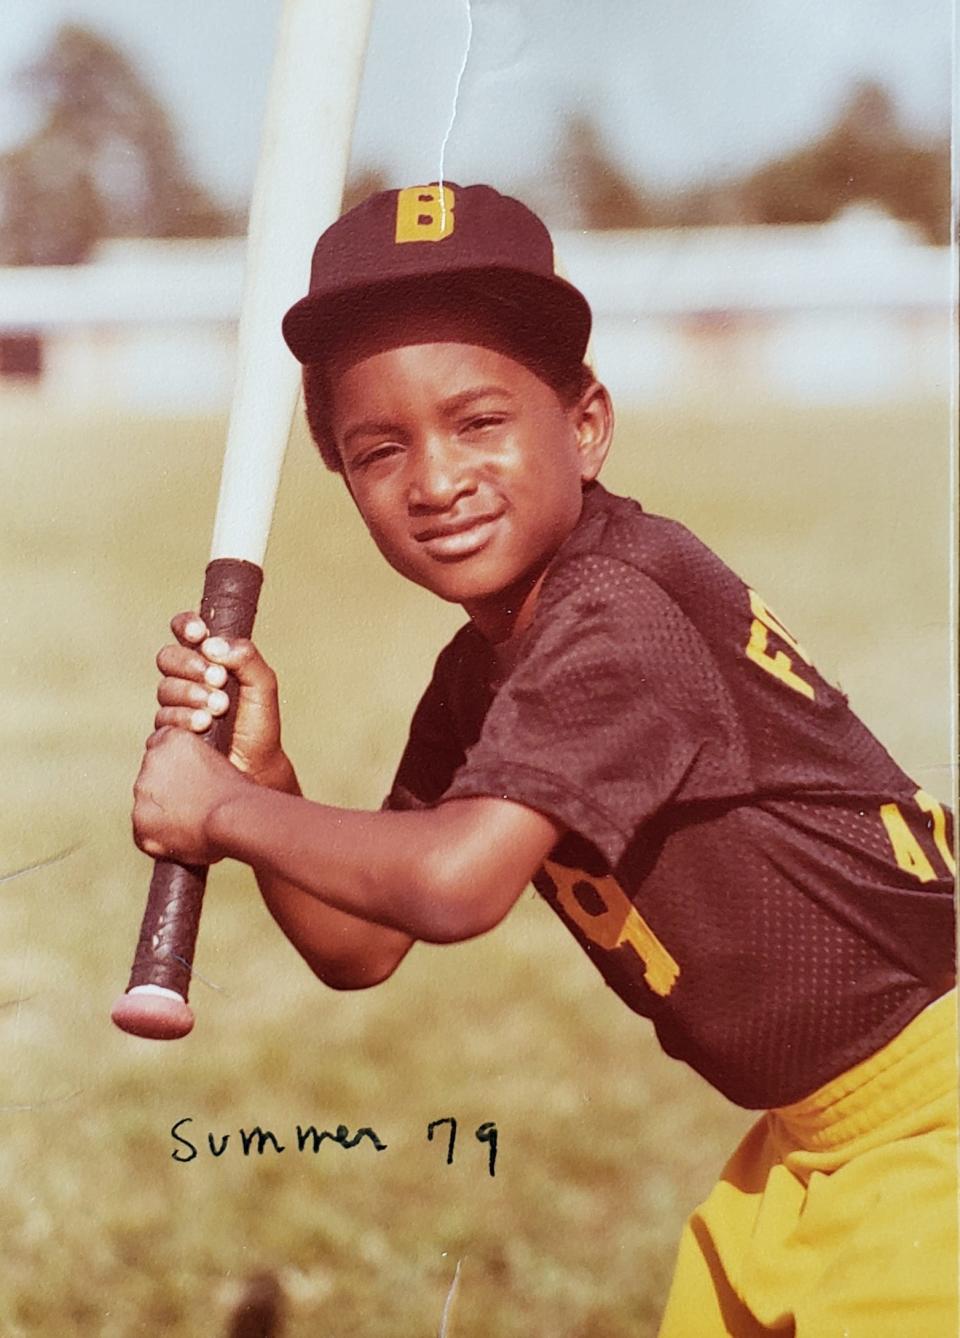 Myron Pitts poses for a photo with his youth baseball team from 1979, the Braves.